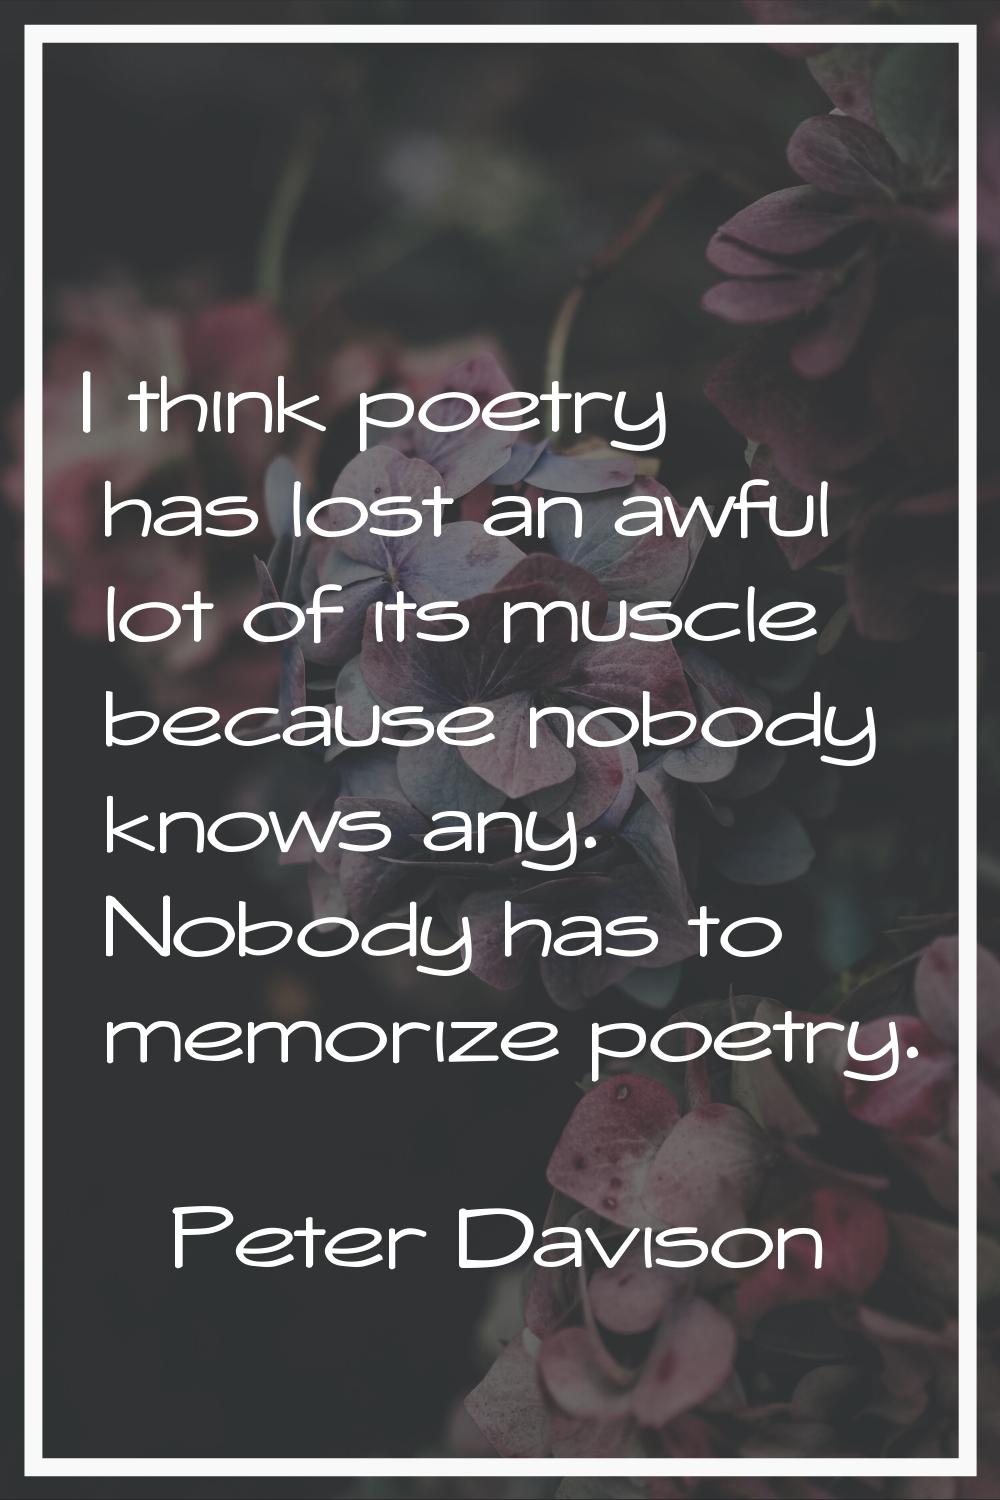 I think poetry has lost an awful lot of its muscle because nobody knows any. Nobody has to memorize